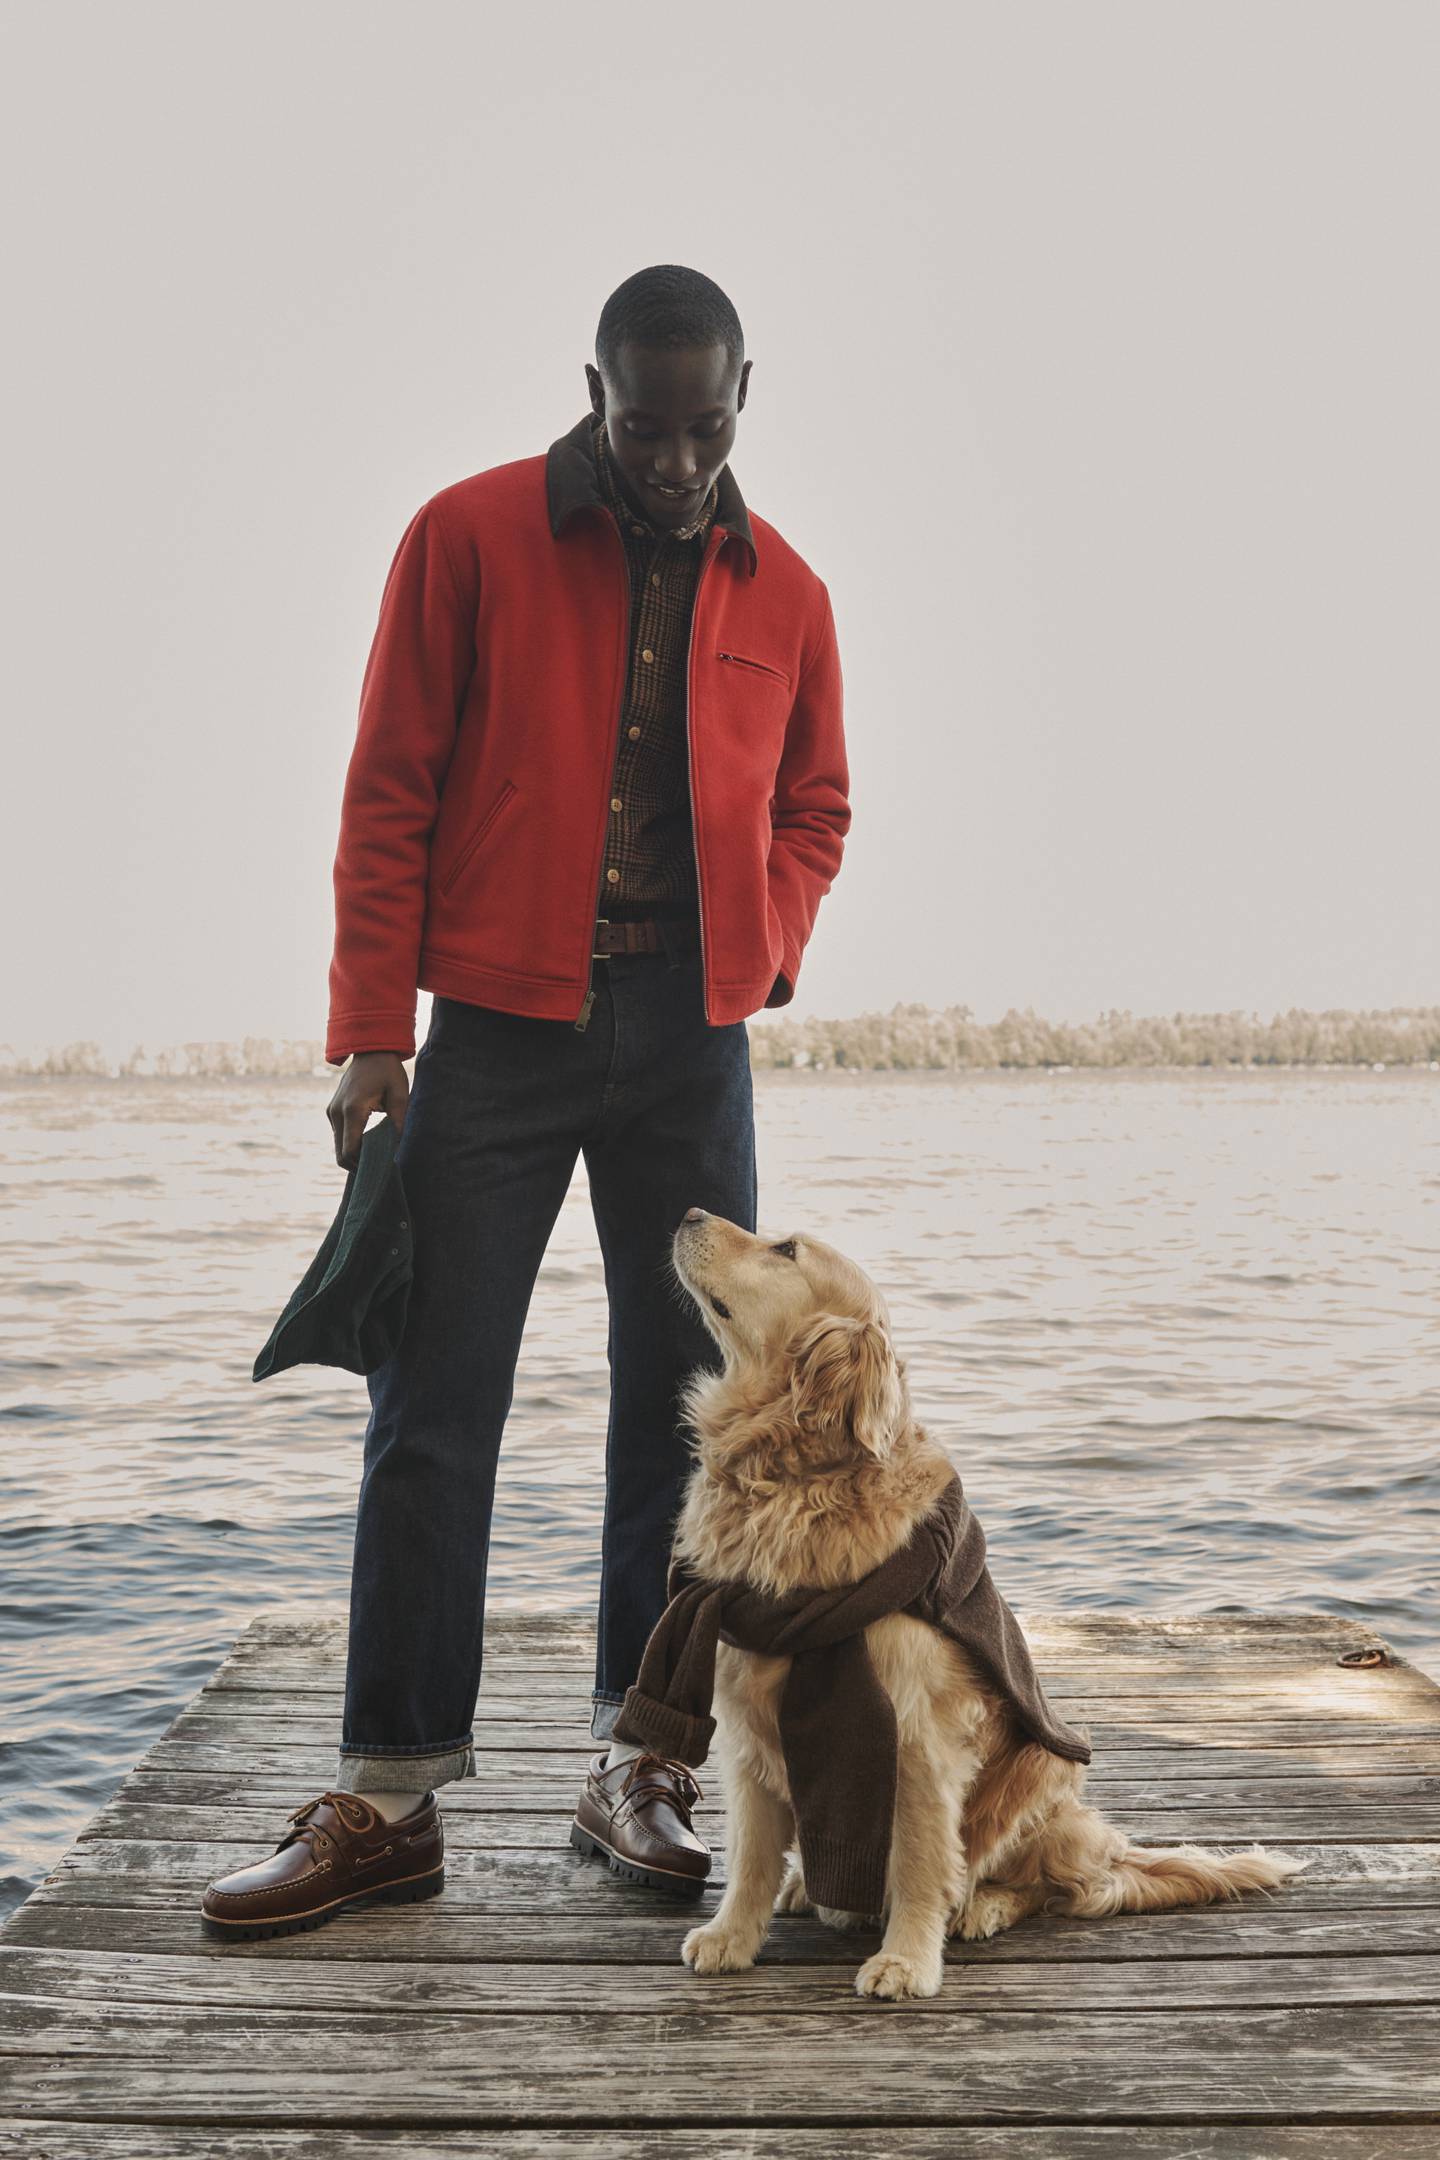 Man in red jacket stands on a dock, looking down to a golden retriever with a sweater tied around its body.